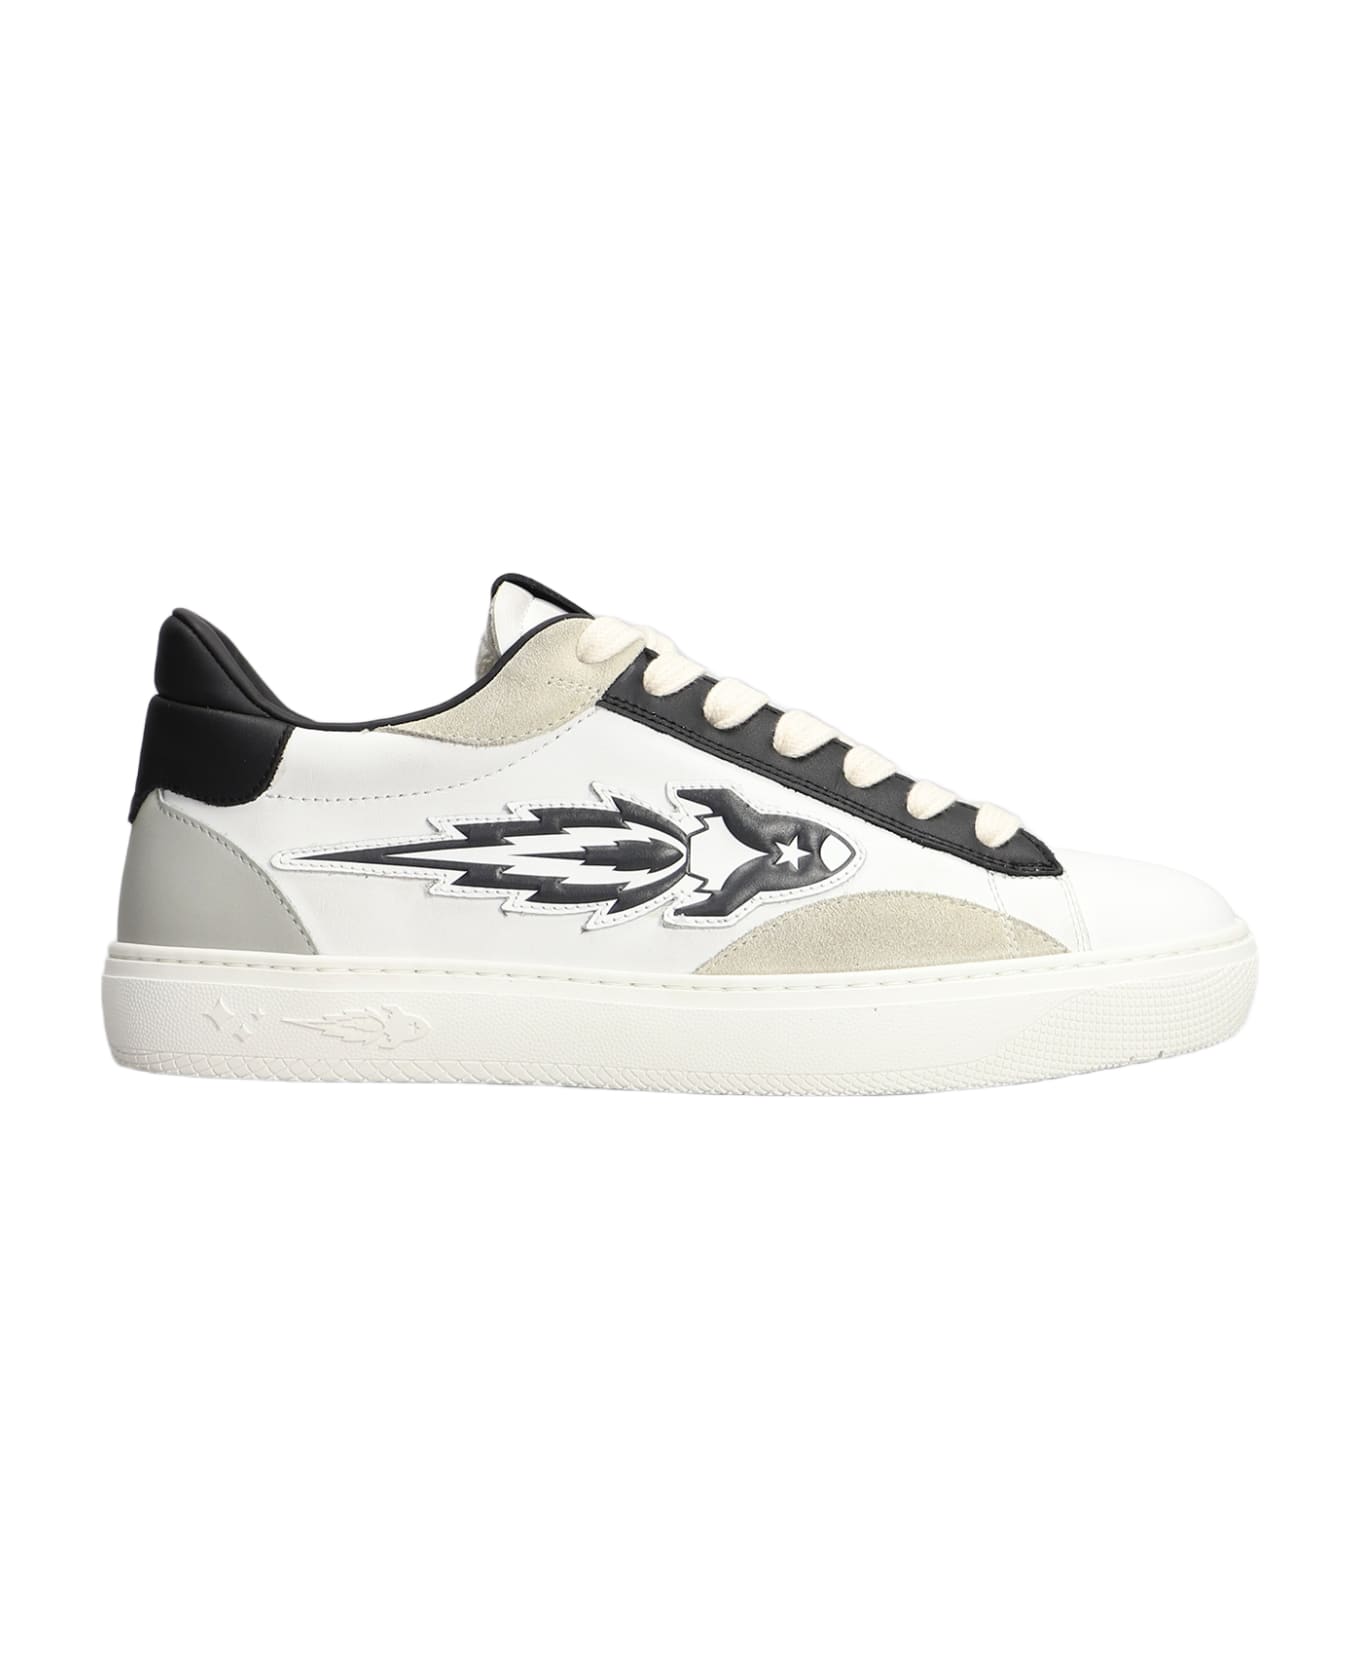 Enterprise Japan Sneakers In White Suede And Leather - white スニーカー